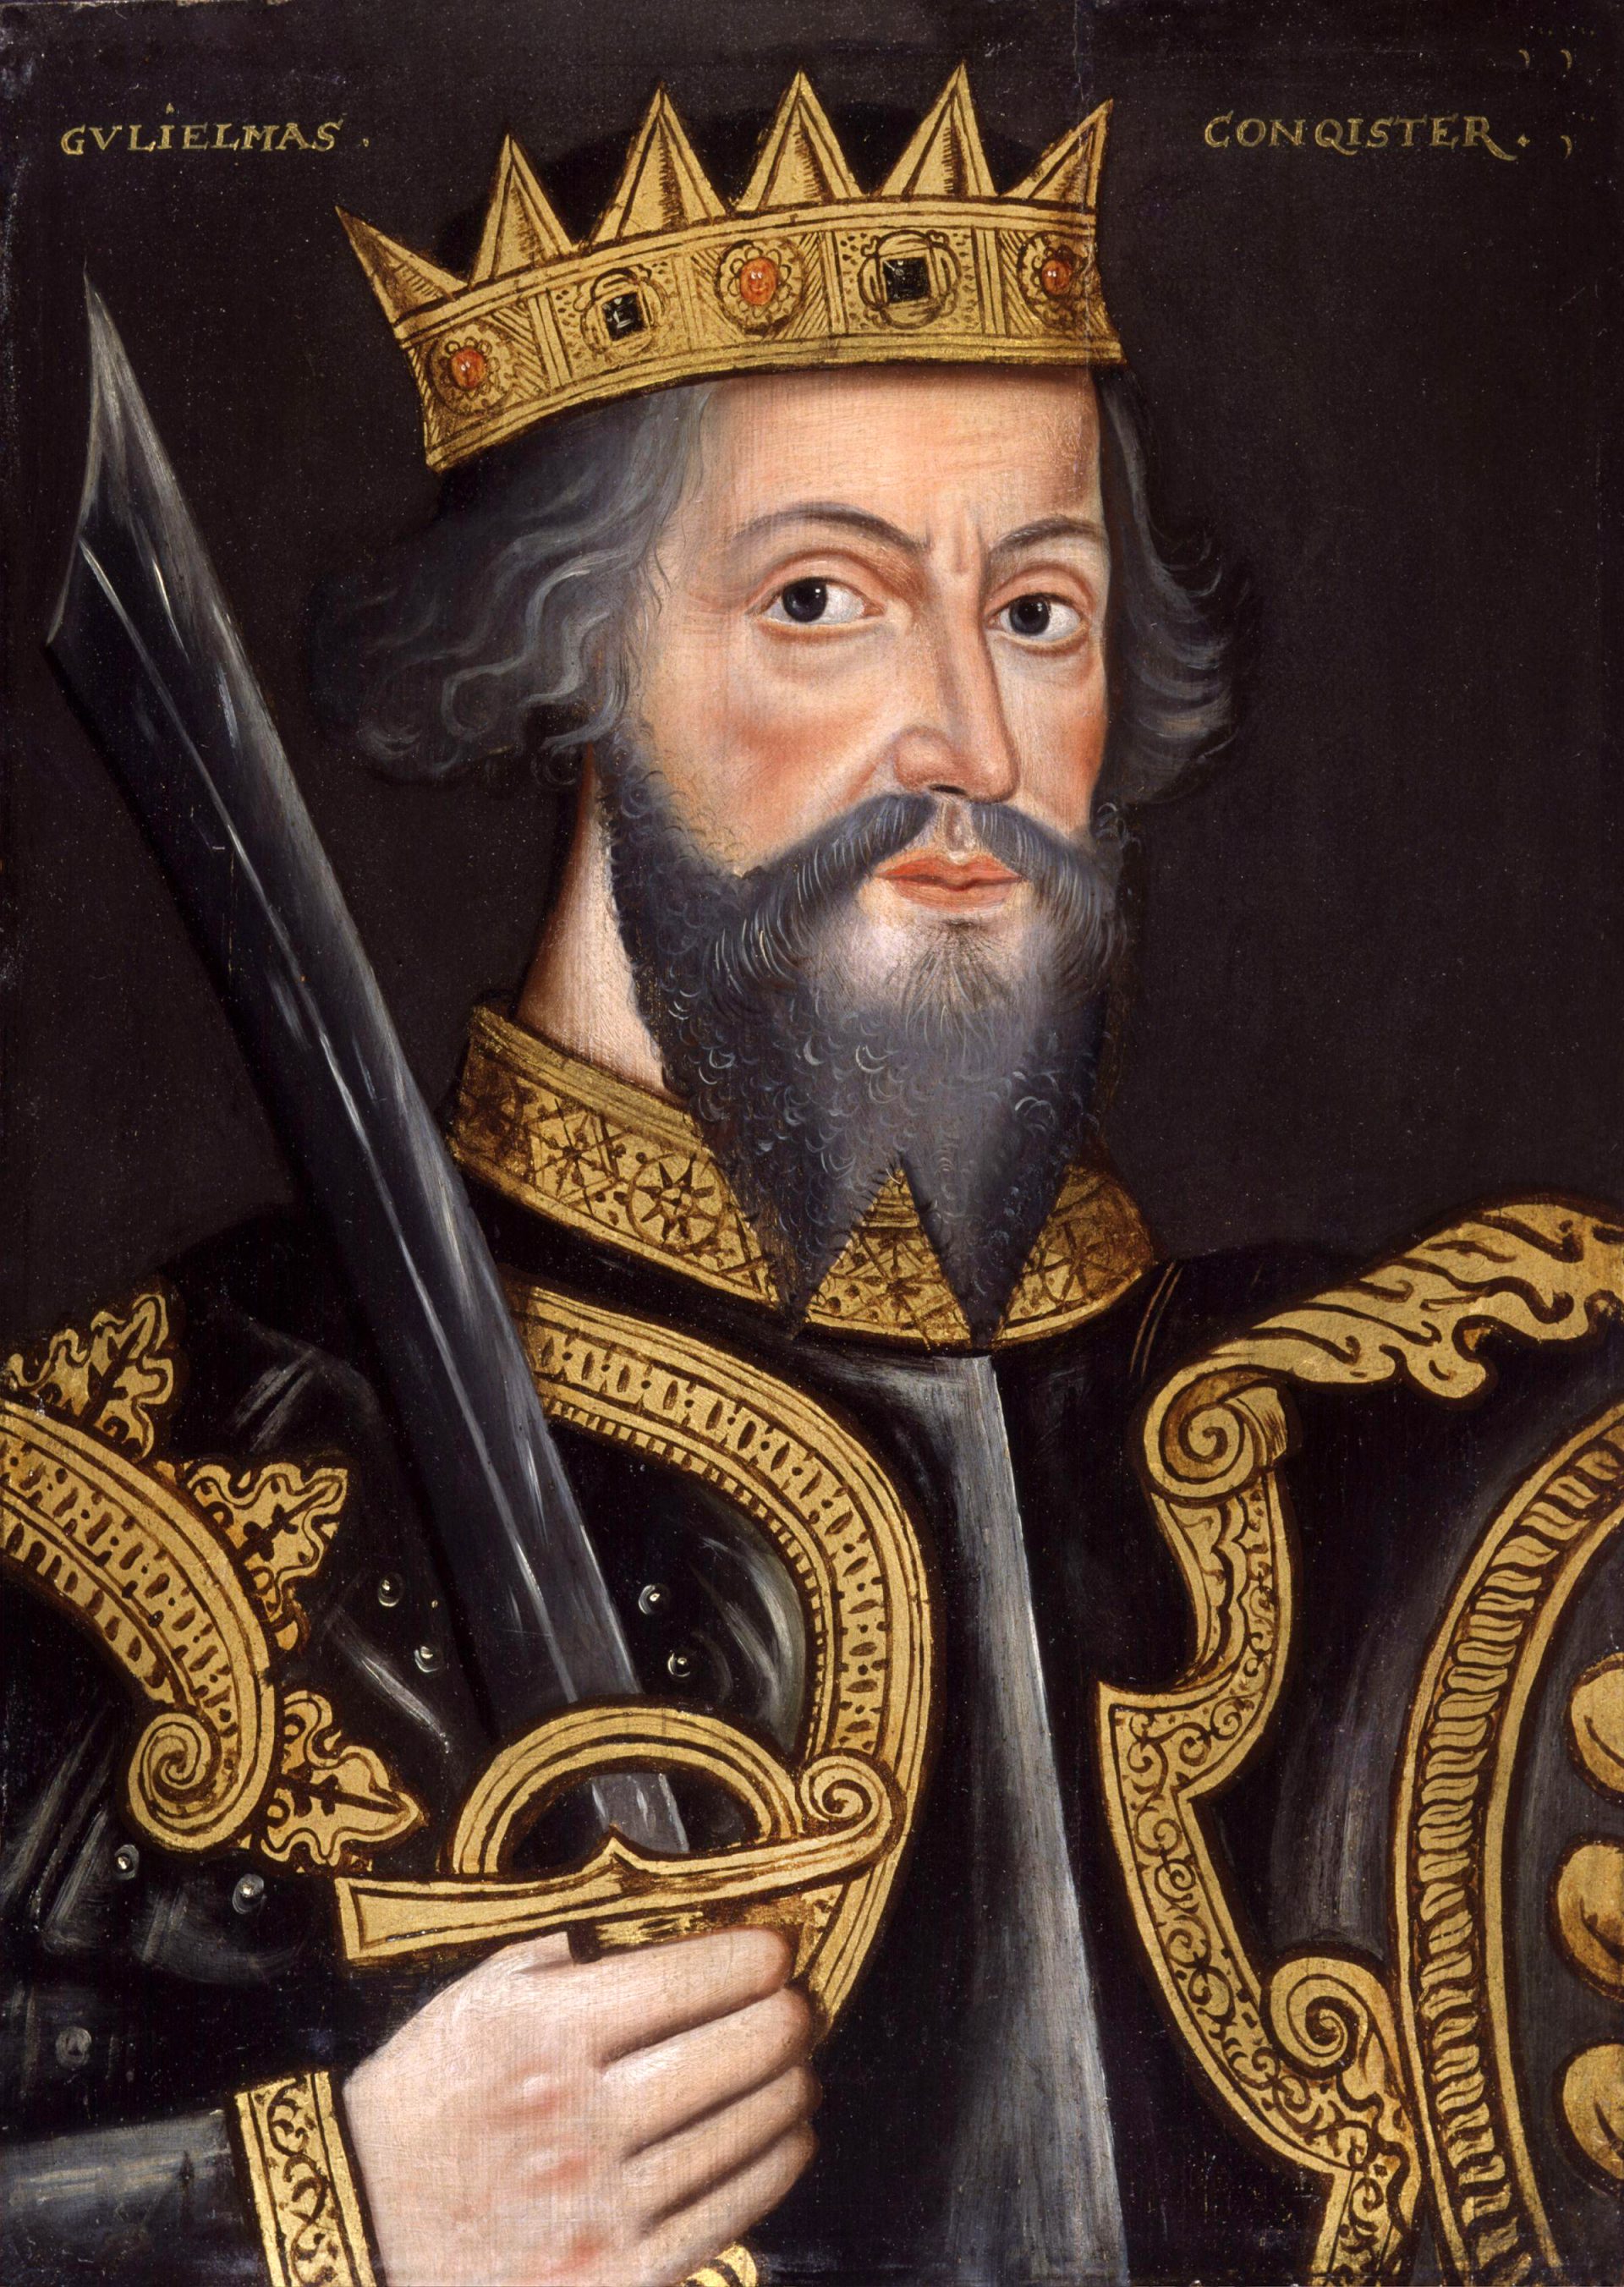 A portrait of a medieval king King William I The Conqueror, wearing a gold crown and a black robe, holding a sword and a shield.